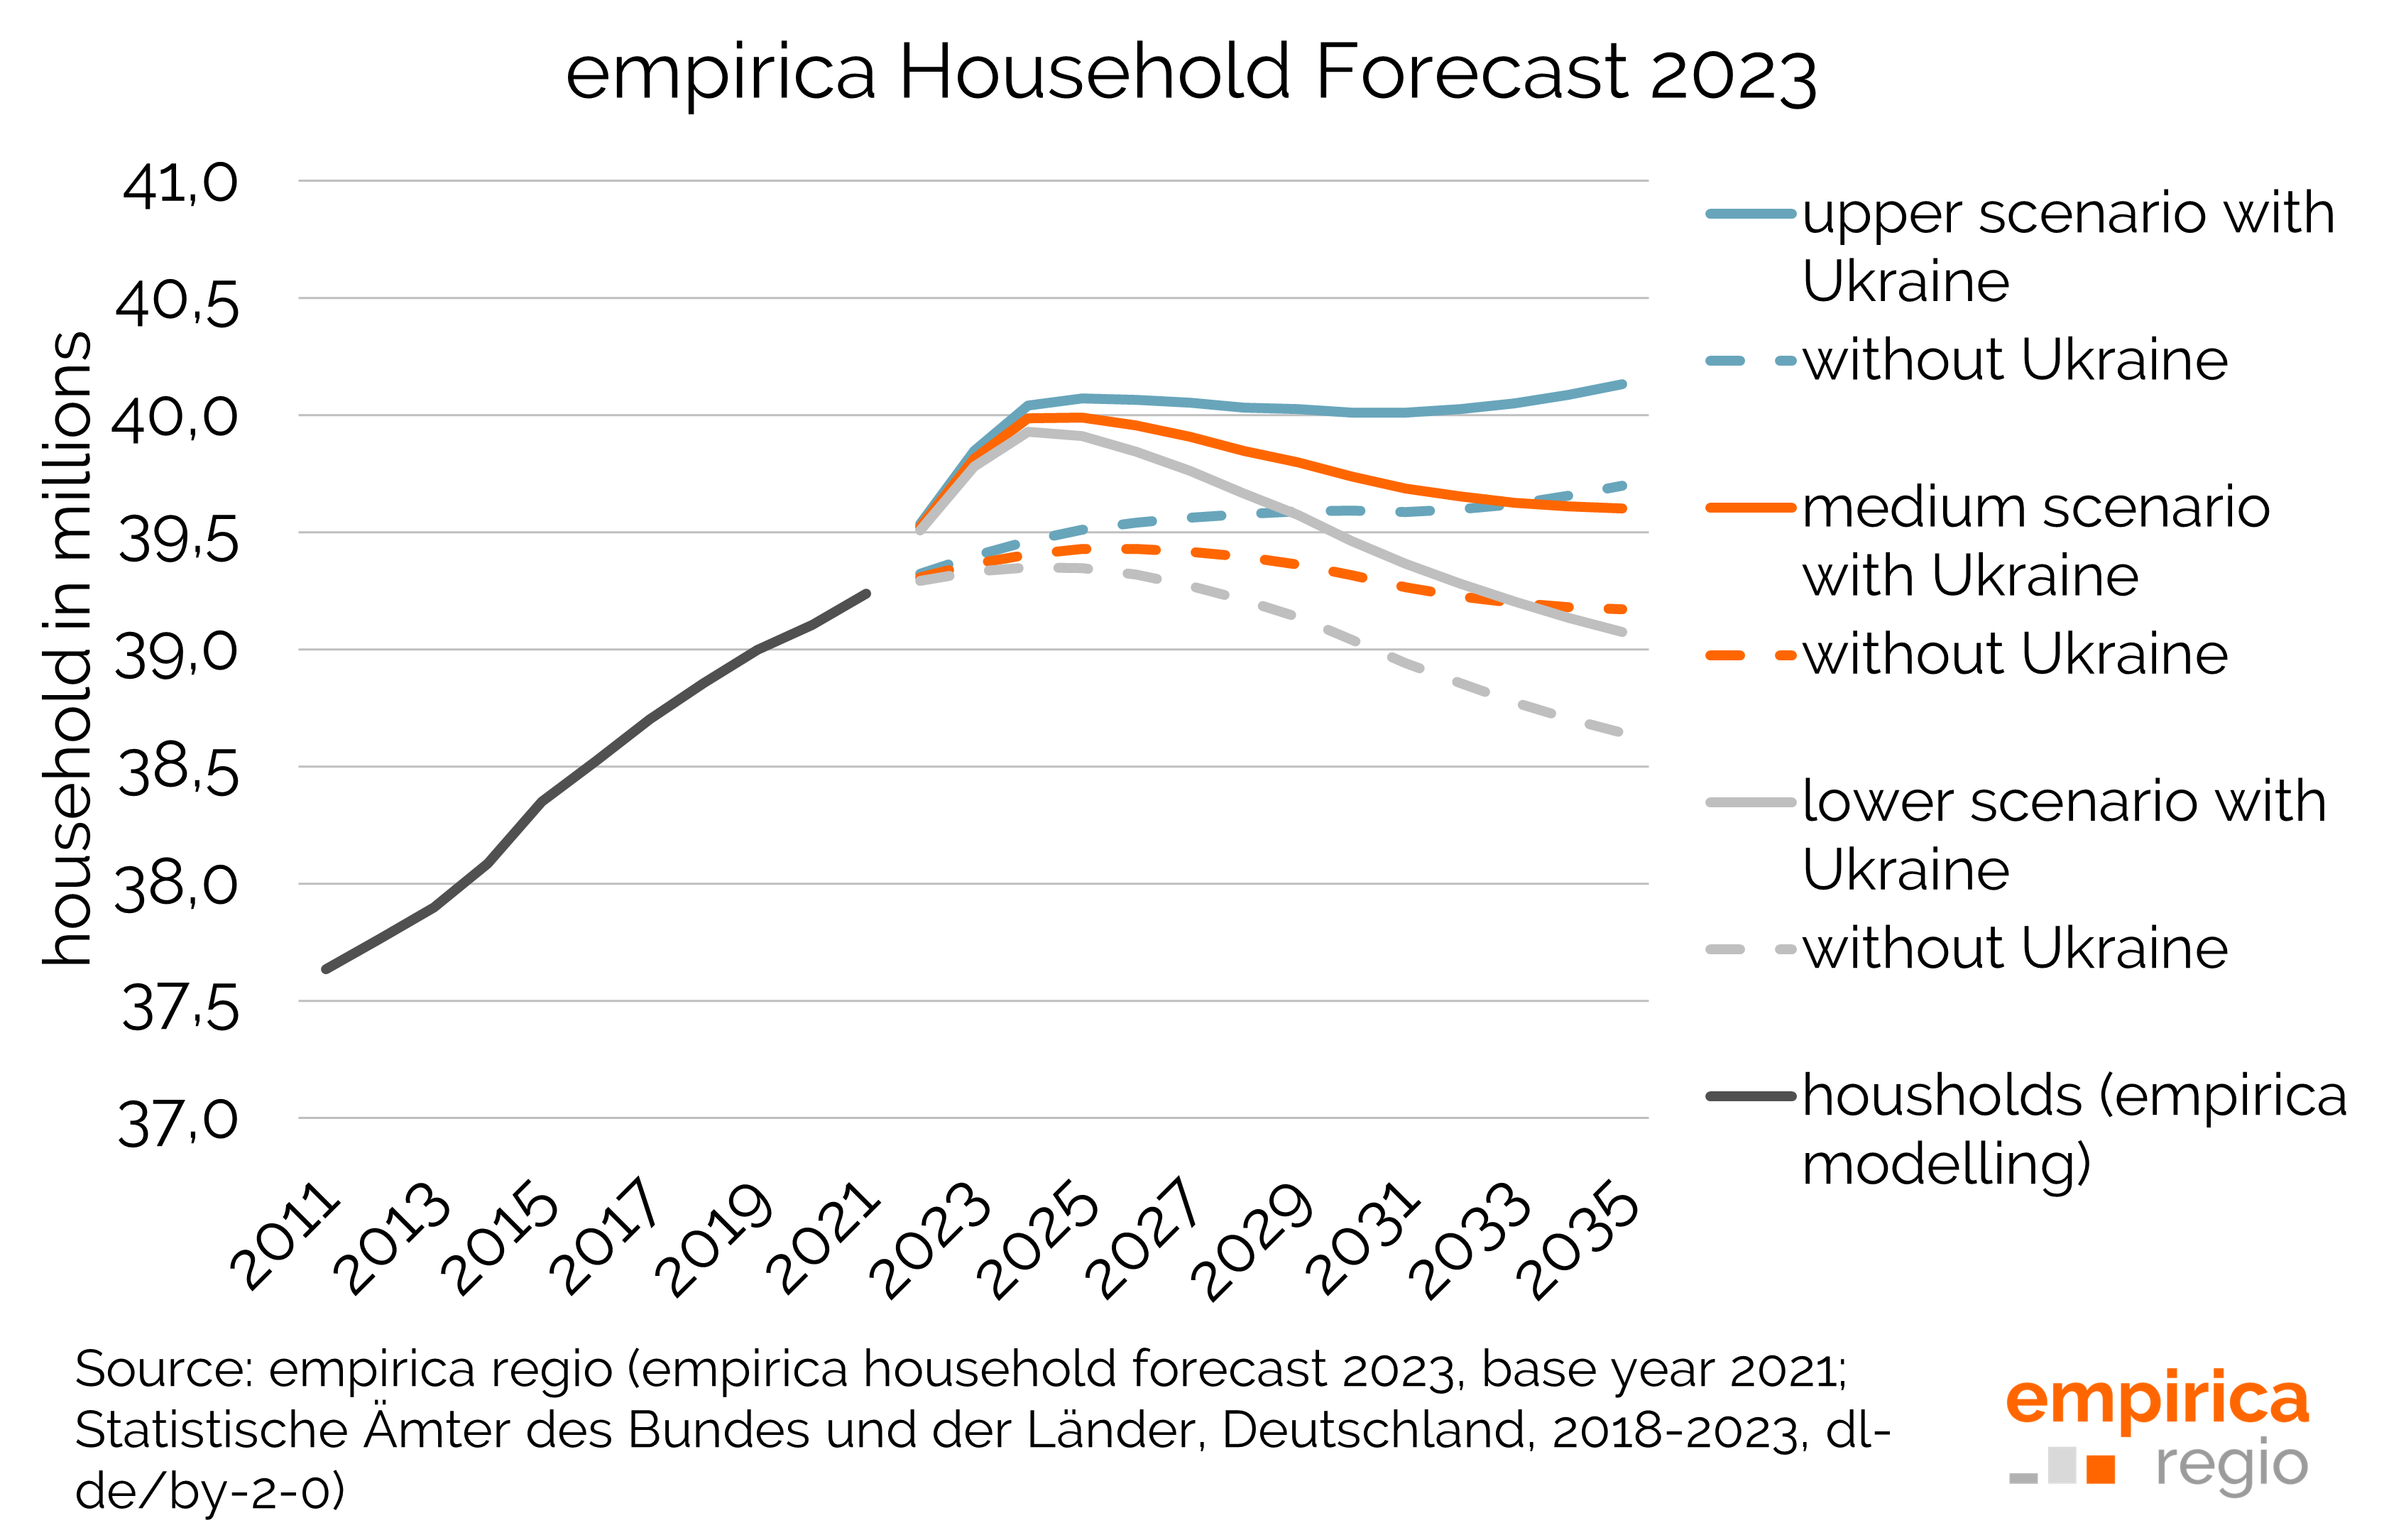 empirica household forecast with and without Ukraine